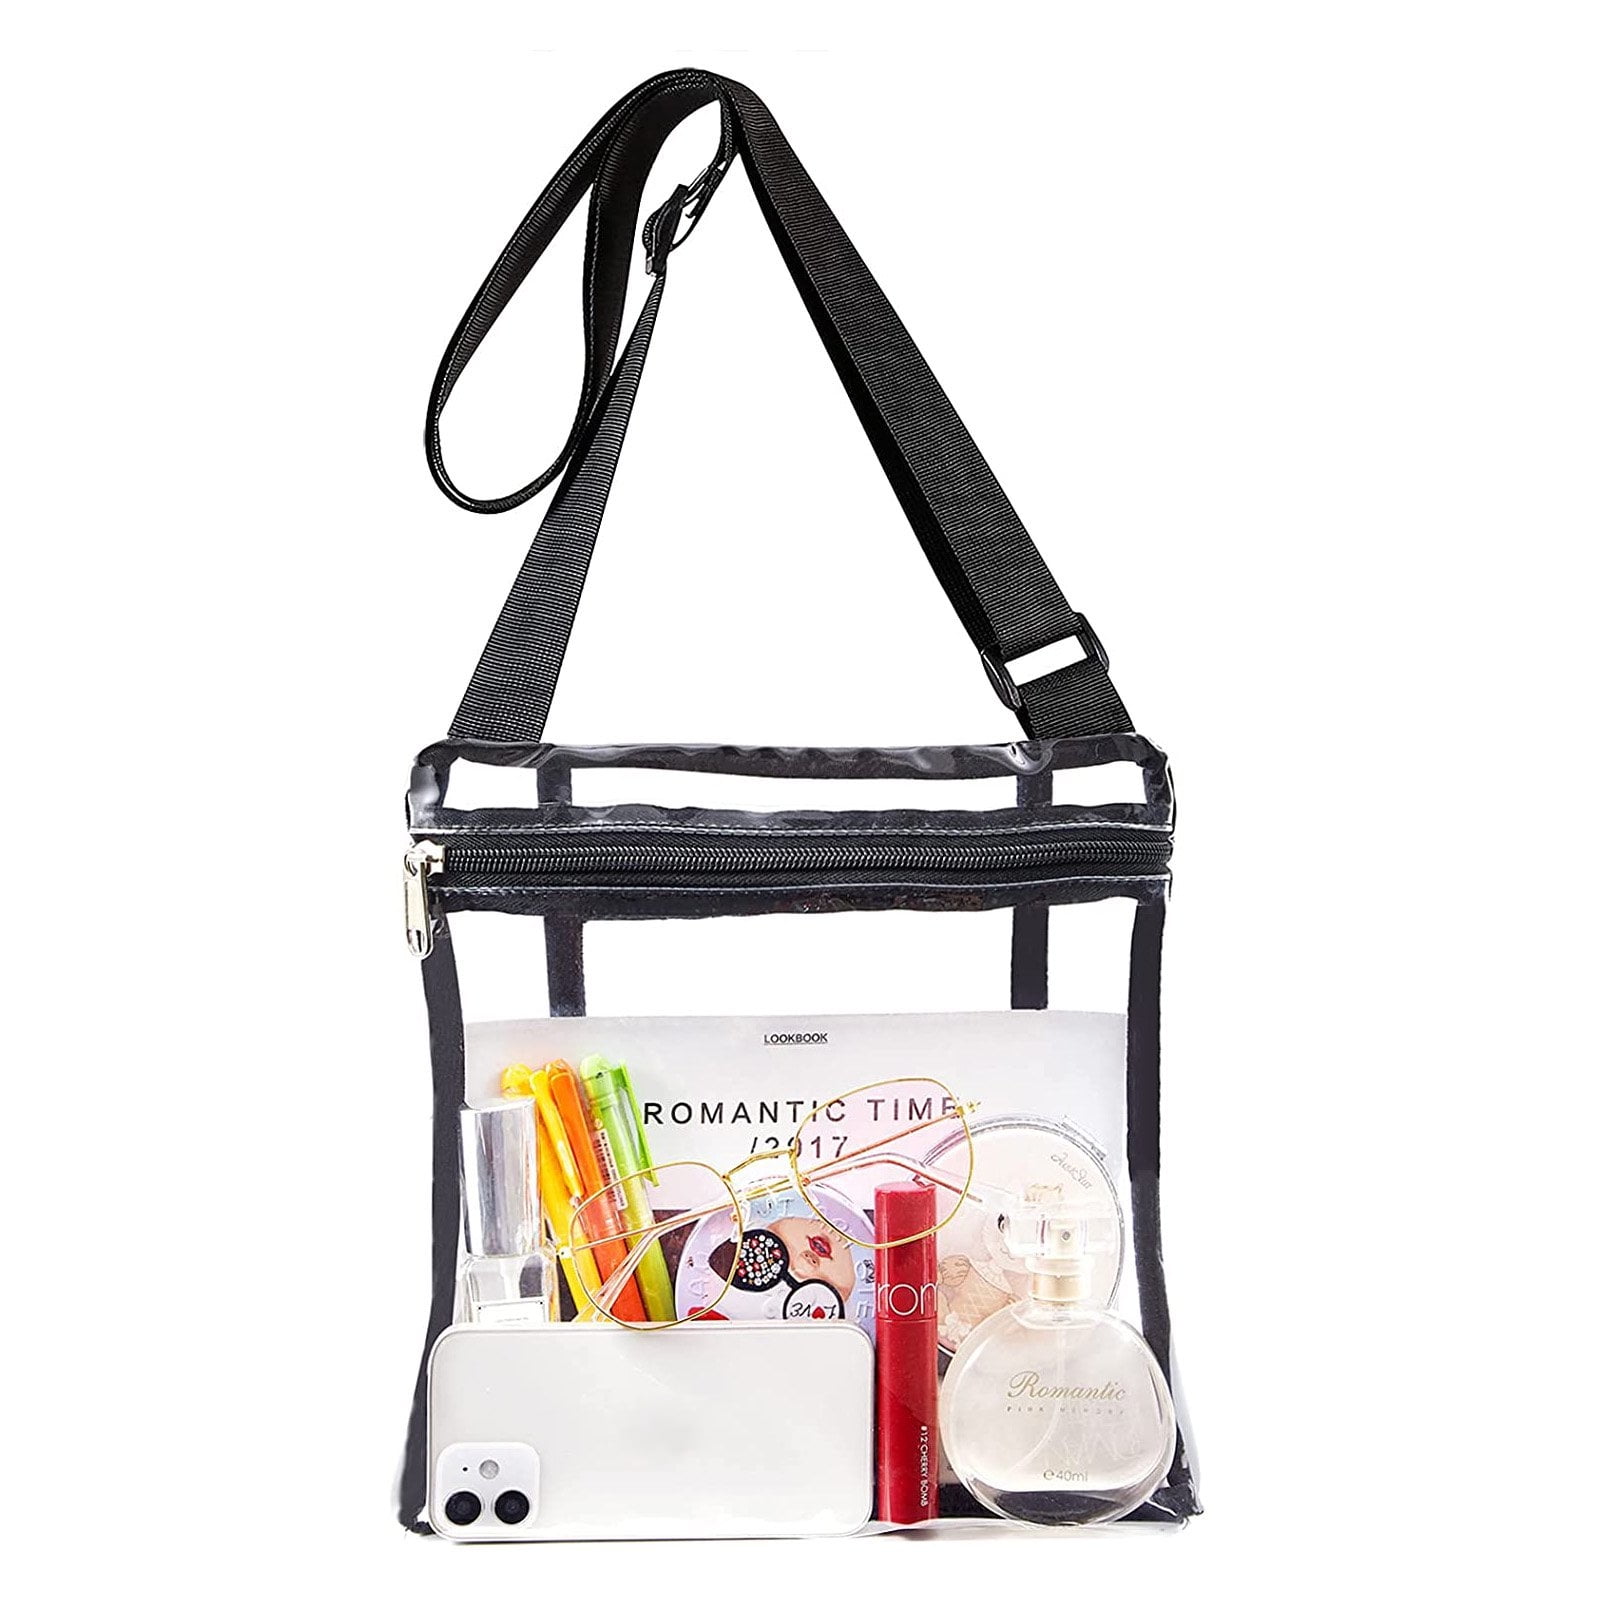 Wanty Adjustable Cross-Body Strap Clear Stadium and Security Approved Travel Large Crossbody Purse Bag with Shoulder Strap 